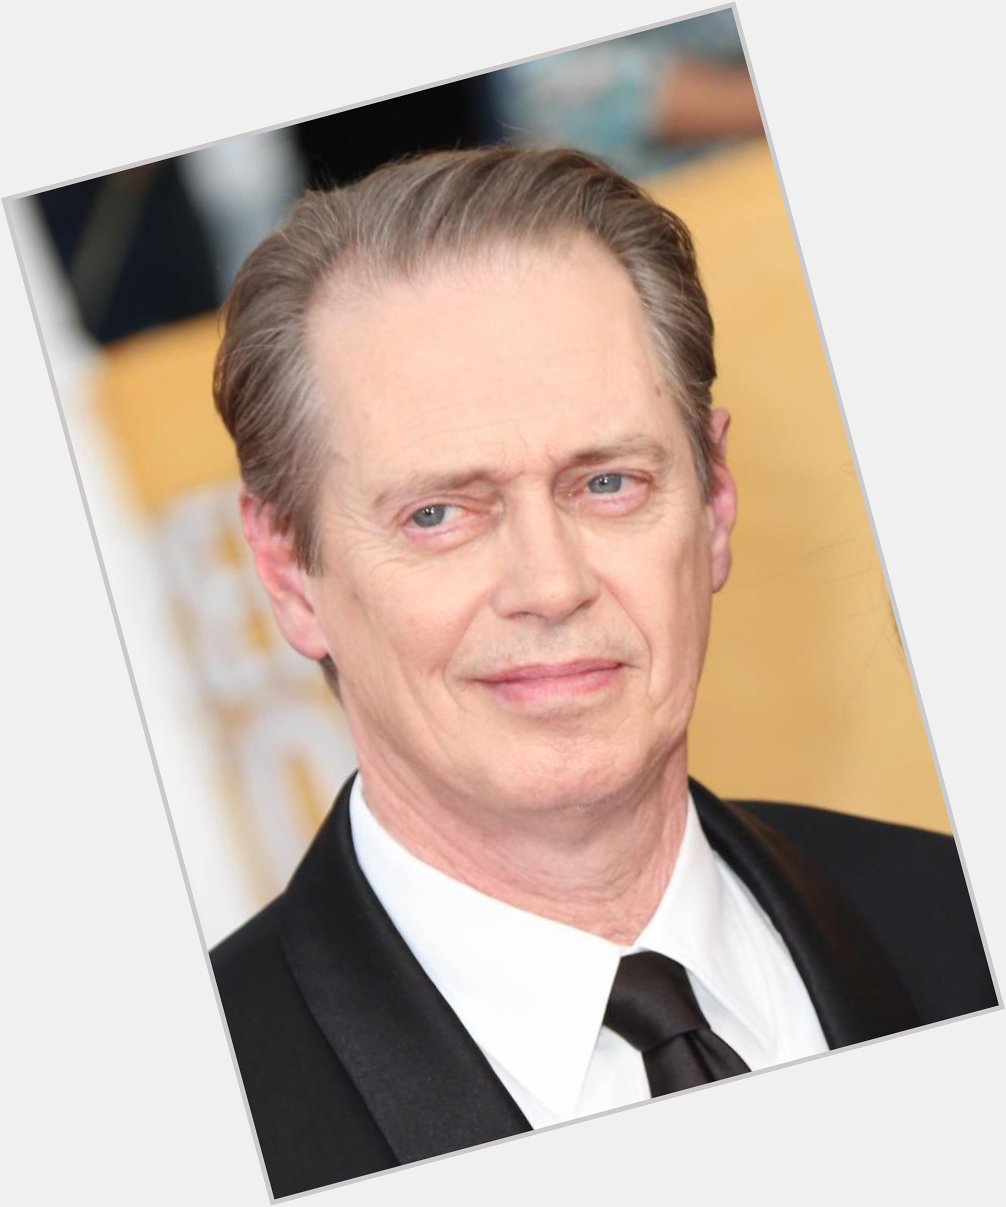 Happy birthday to the all time love of my life and inspiration, Steve Buscemi, rock on soldier 